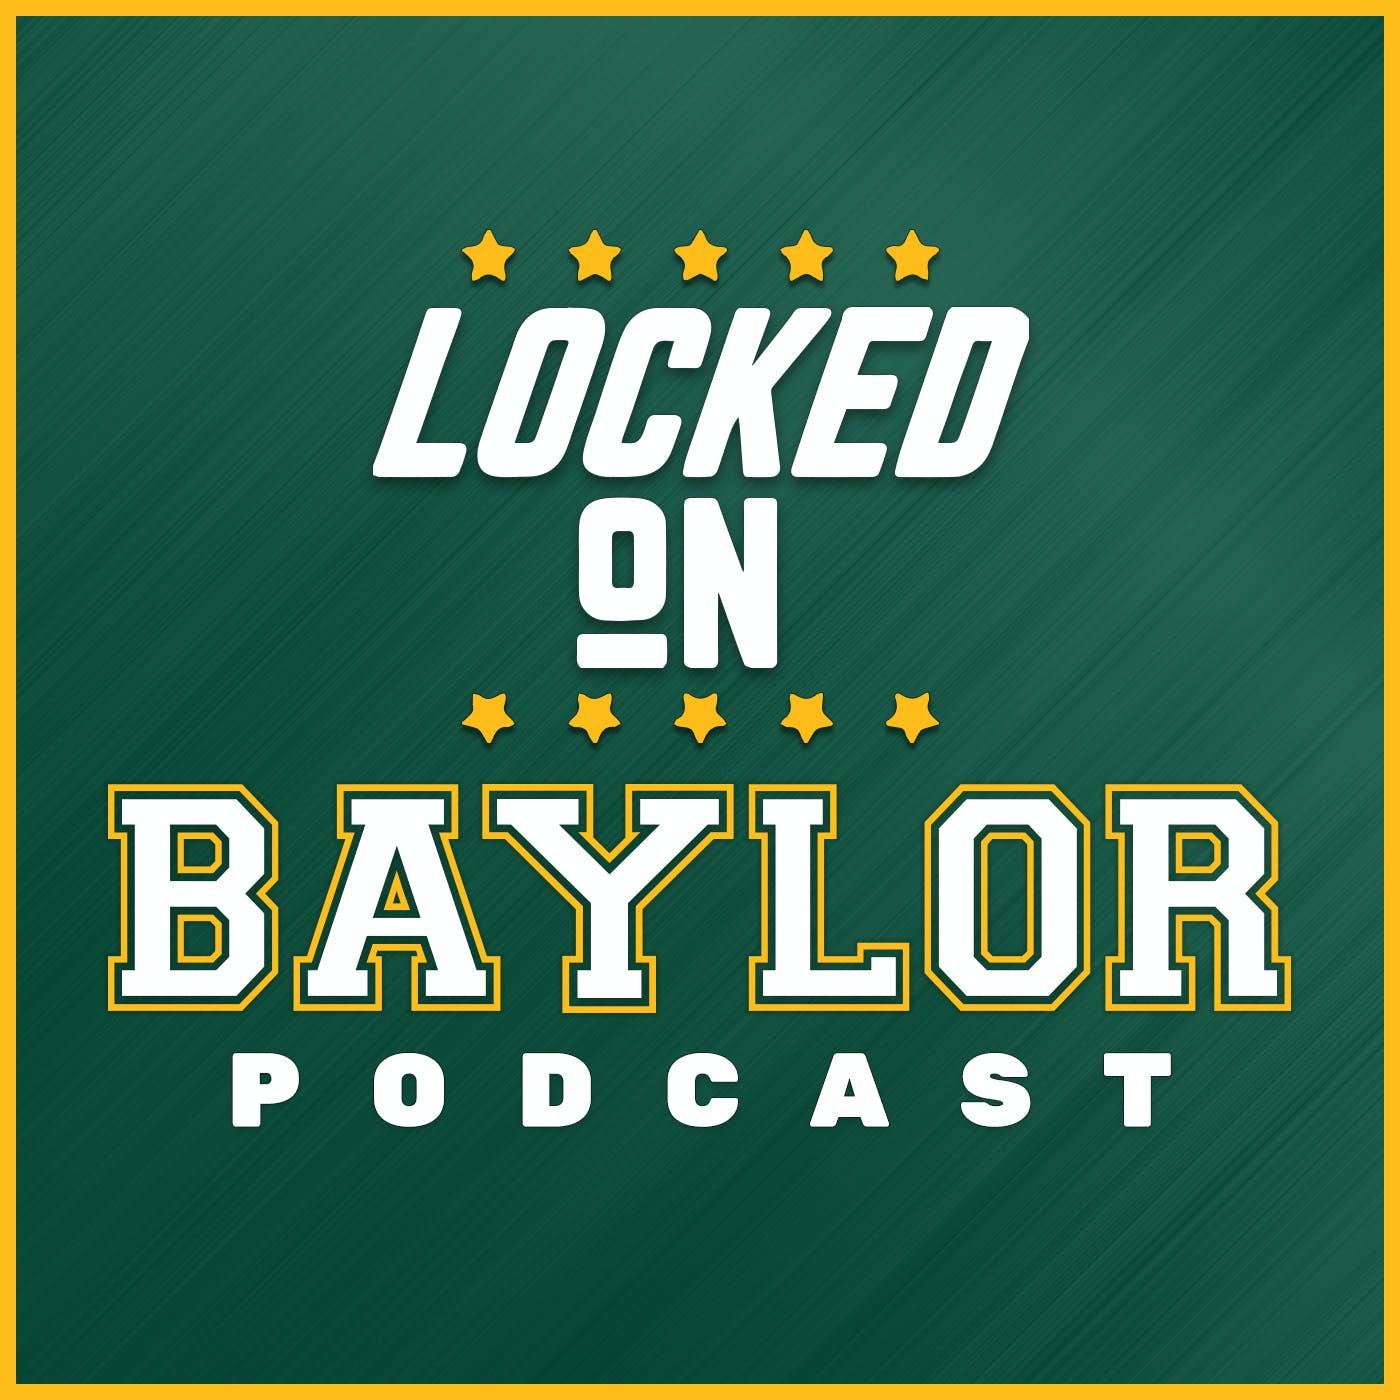 Show poster of Locked On Baylor - Daily Podcast on Baylor Bears Football & Basketball